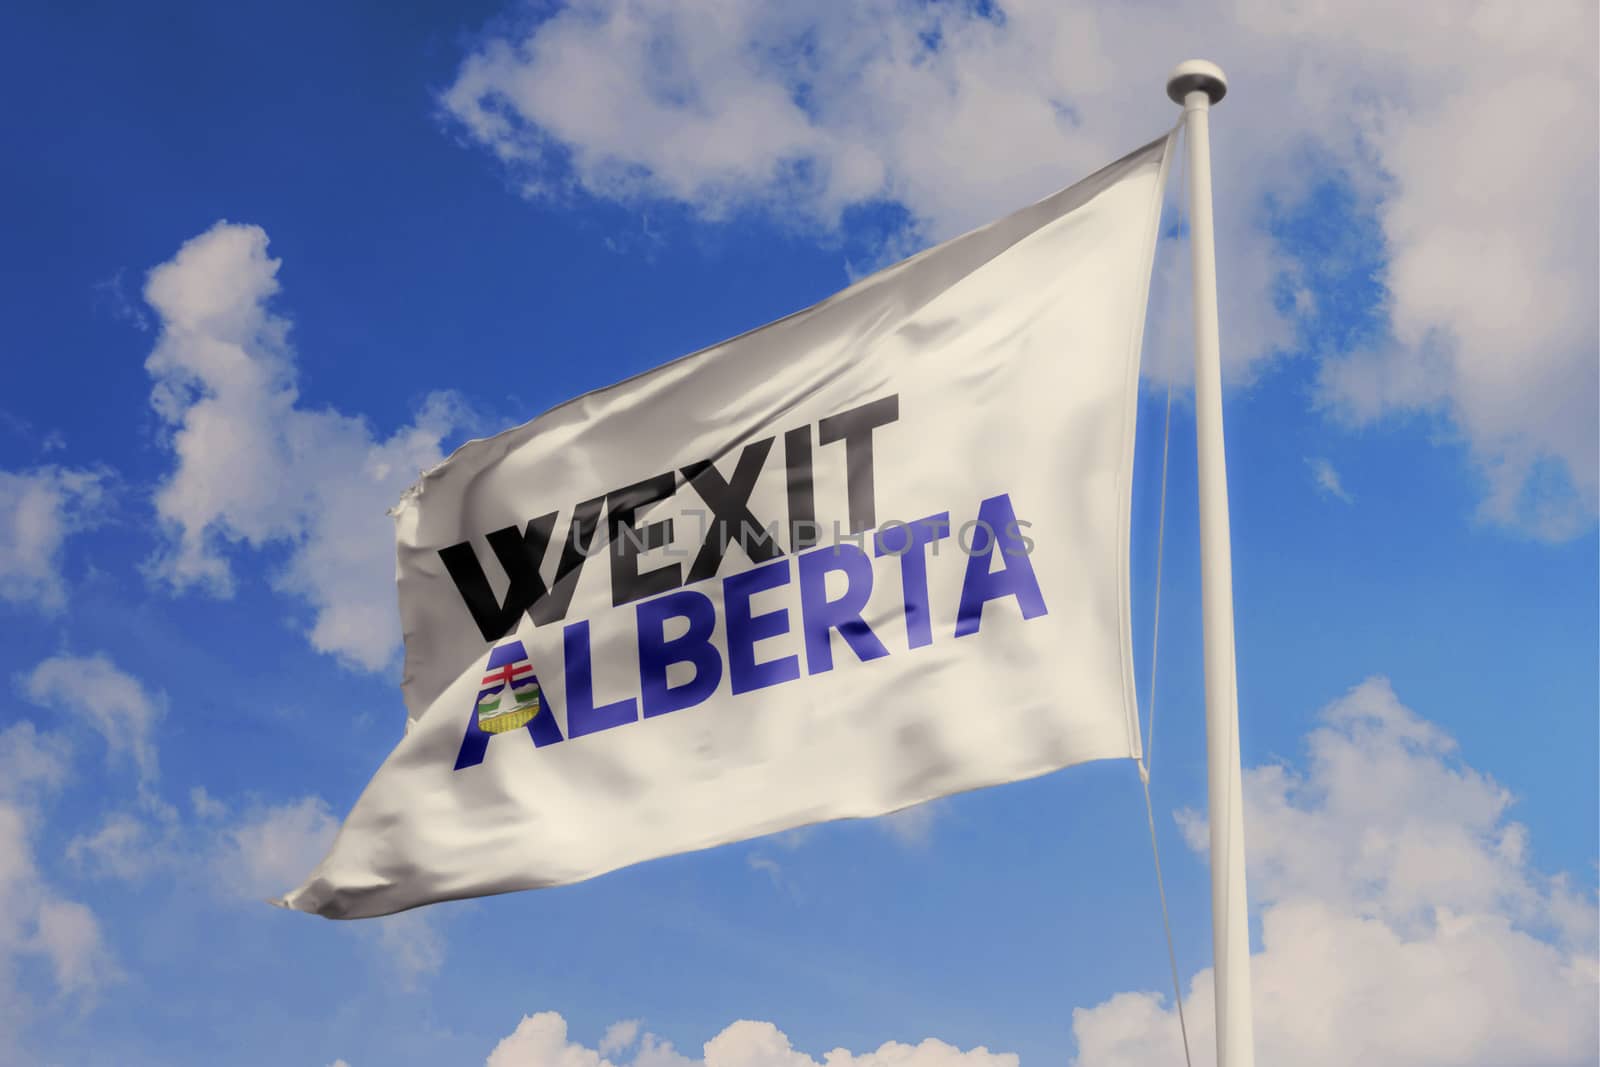 Wexit Alberta flag waving on the sky by oasisamuel